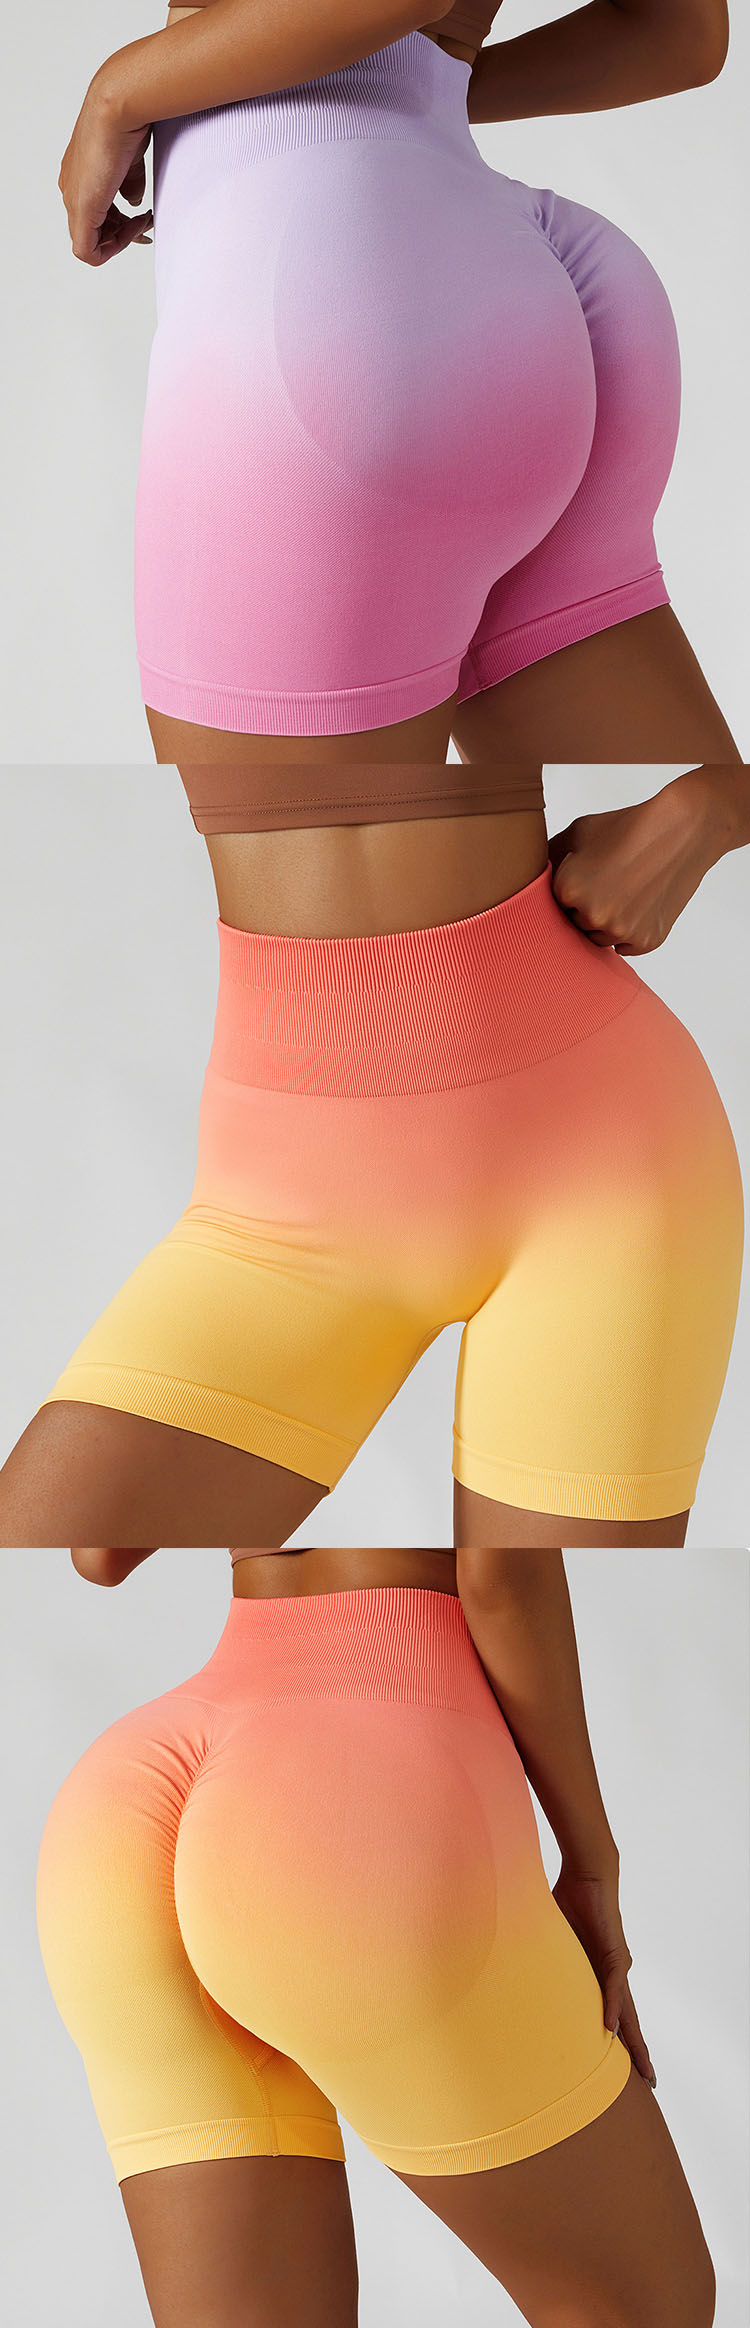 Hip-lifting design, showing sexy buttocks